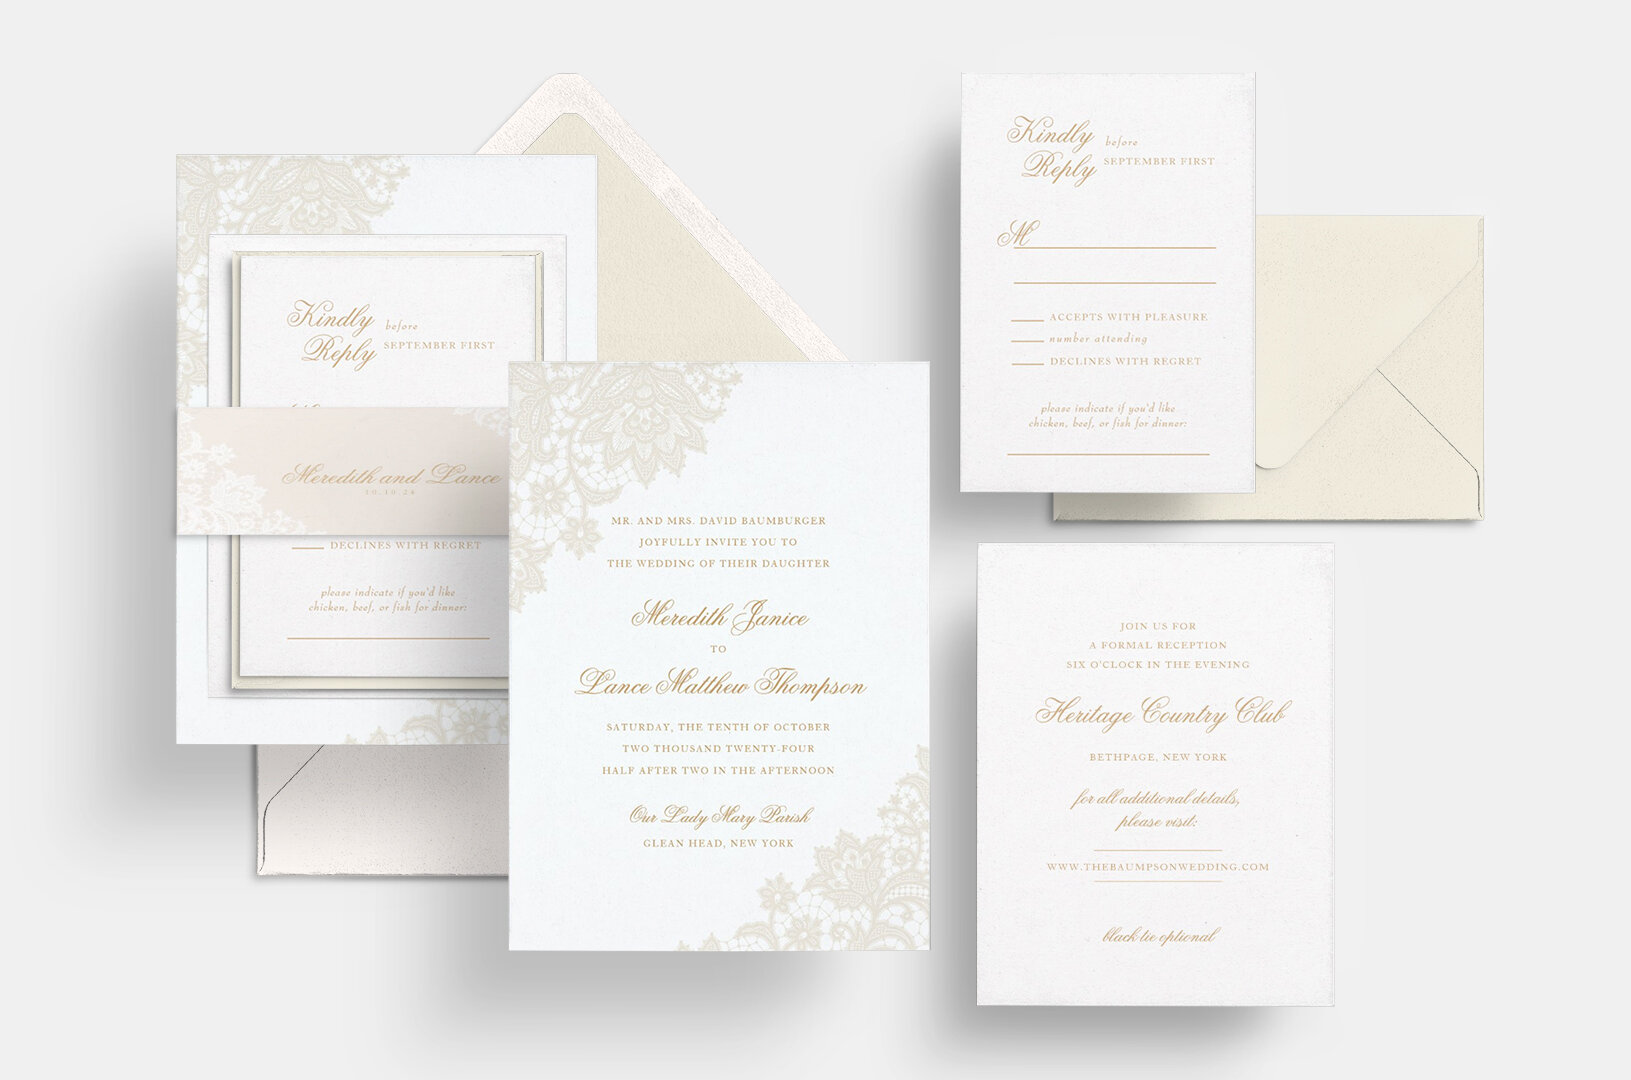 Delicate Lace Suite Sincerely Jackie Long Island Wedding Invitations 1.jpg